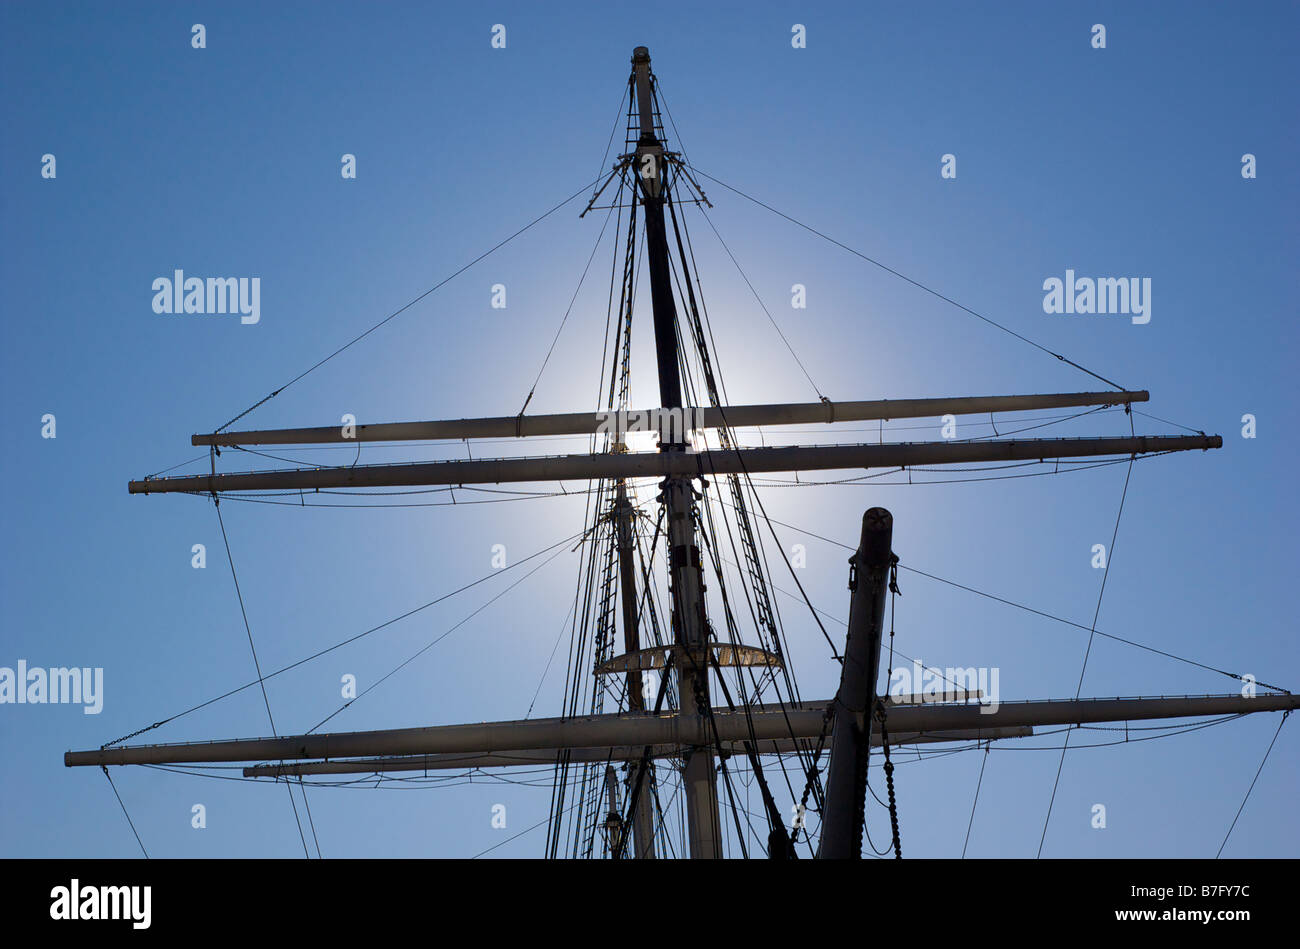 Silhouette of Sailing Mast against a blue sky Stock Photo